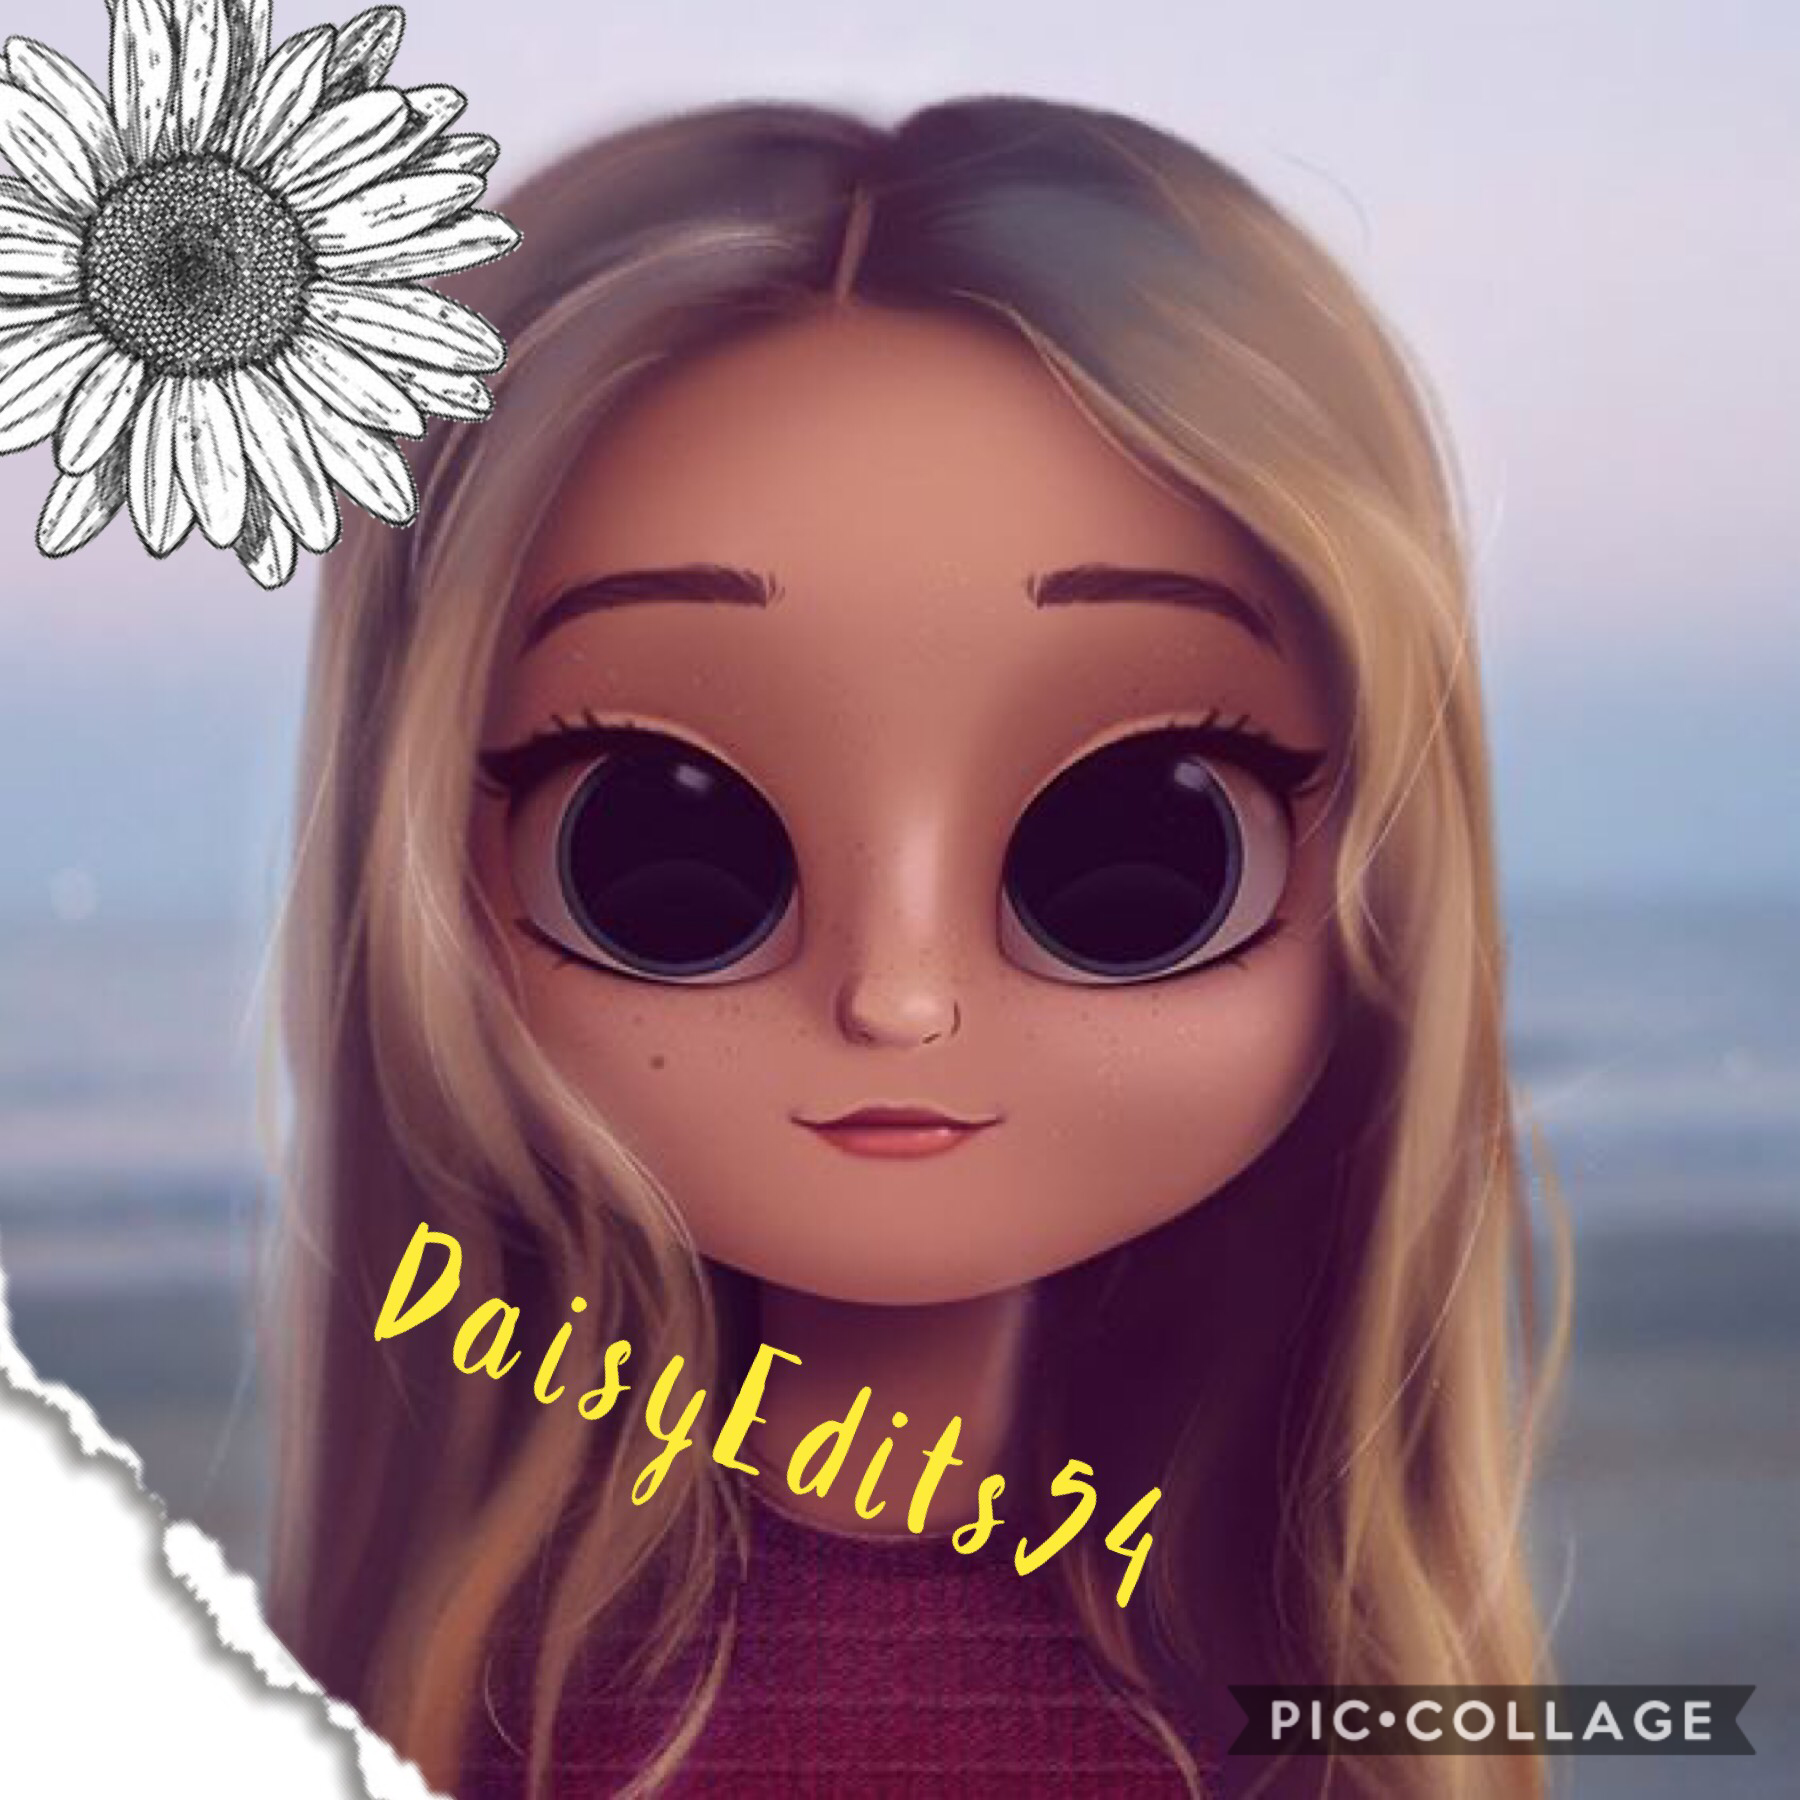 Hi, welcome to my new account if you want me to make you a icon just comment on this picture and I will make you one. Don’t forget to follow thanks😇